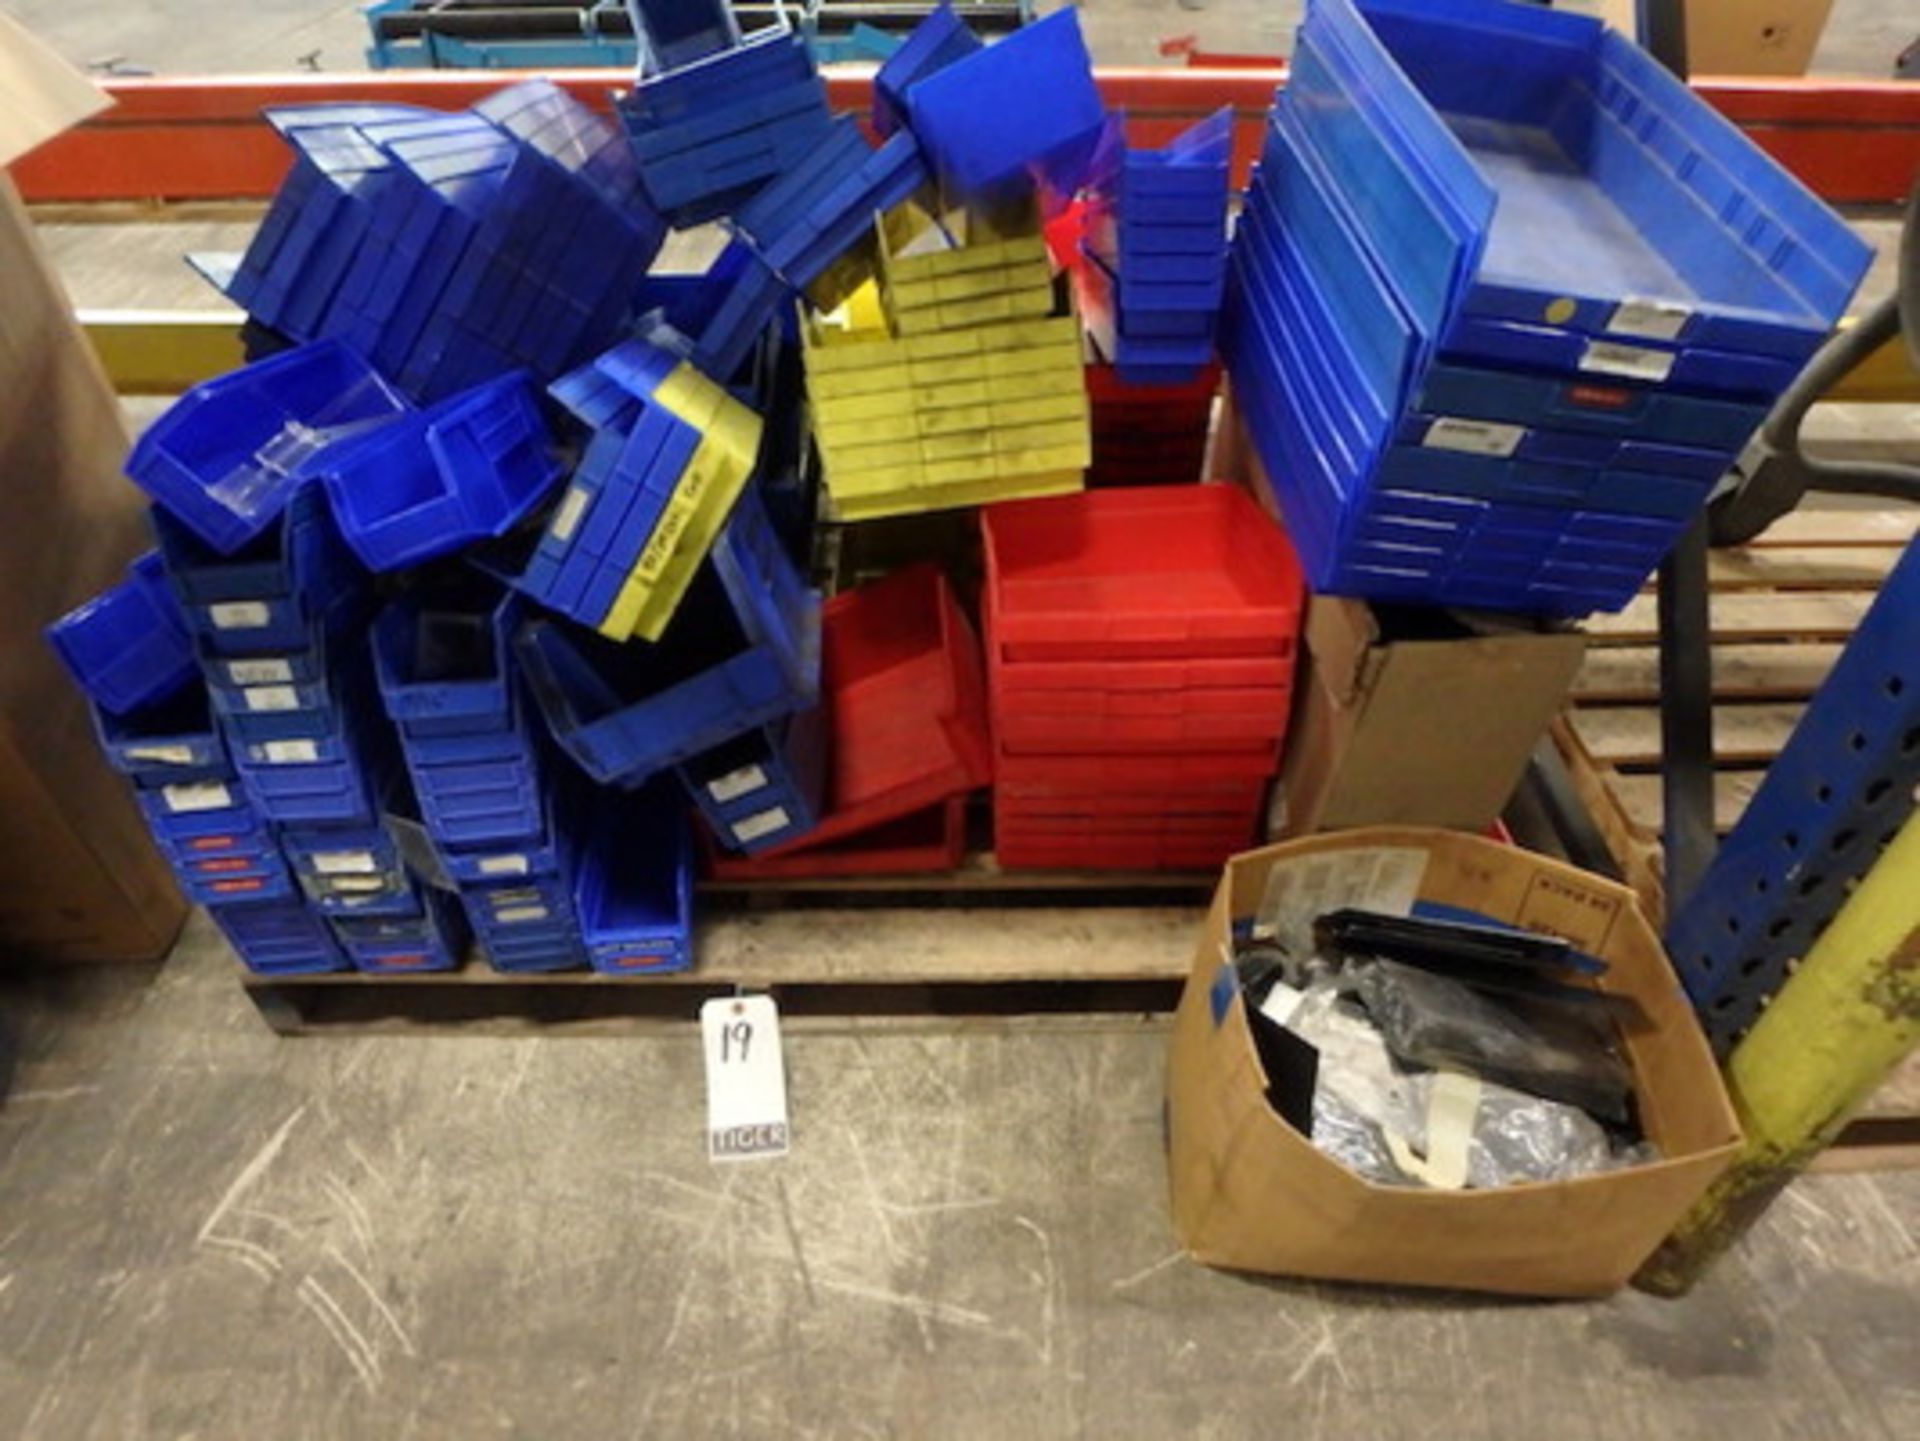 Lot of: Assorted Plastic Bins and Dividers, (on Pallet) (Asset Location: Warehouse), (Site Location: